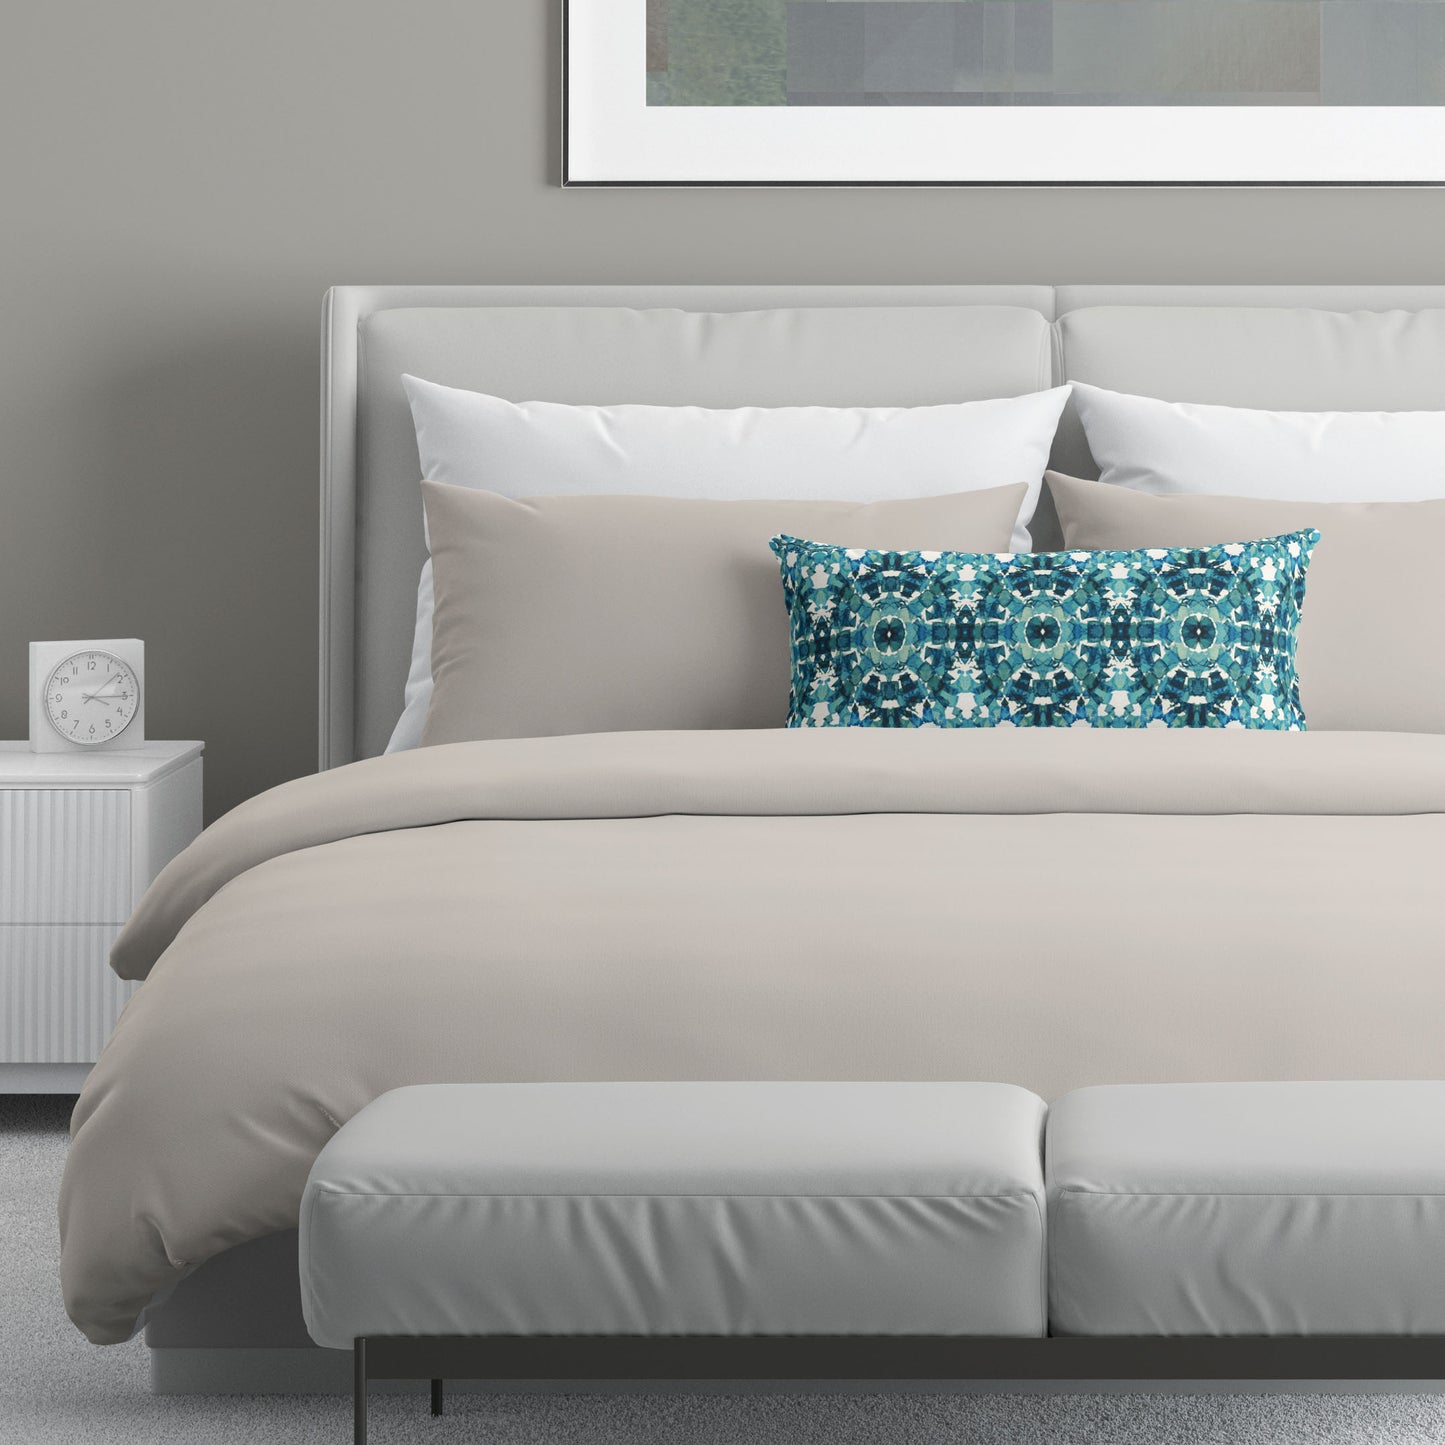 Neutral colored bedroom featuring a bed with an teal abstract patterned lumbar pillow.